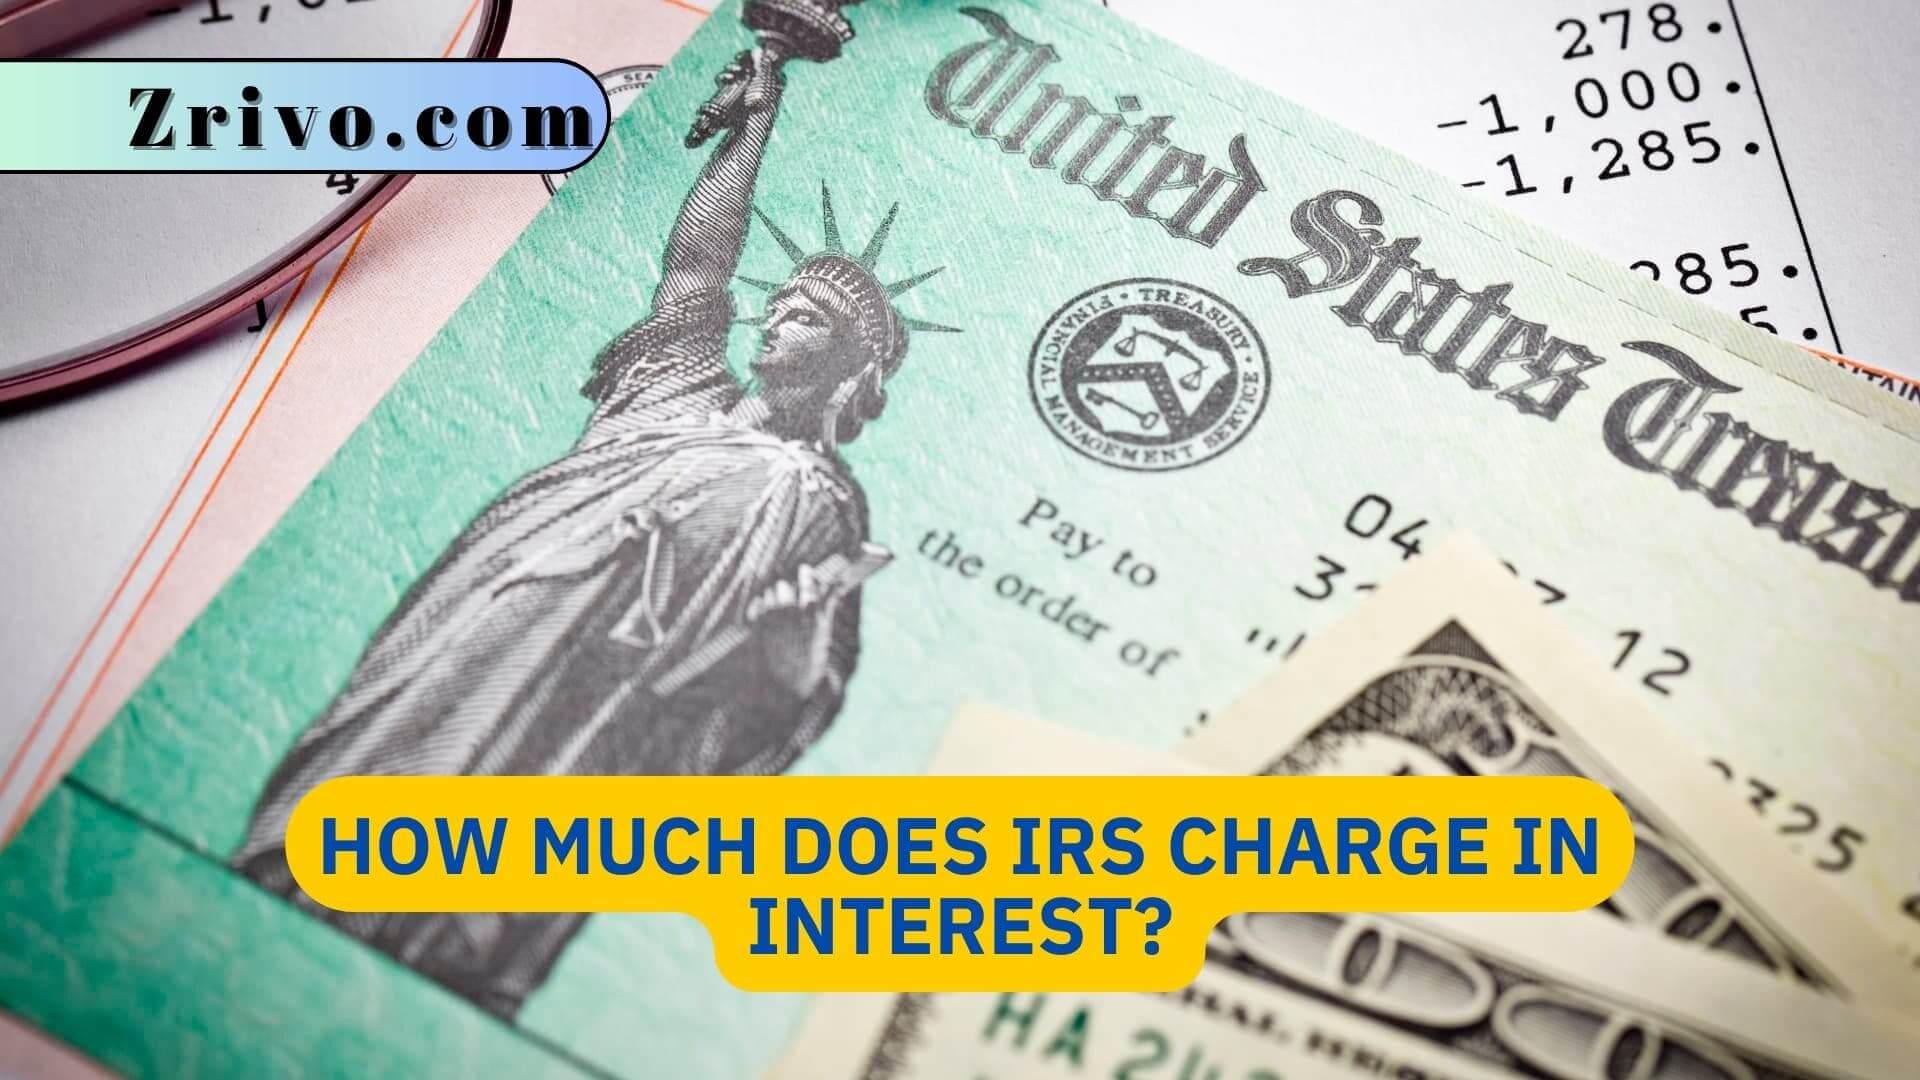 How Much Does IRS Charge in Interest